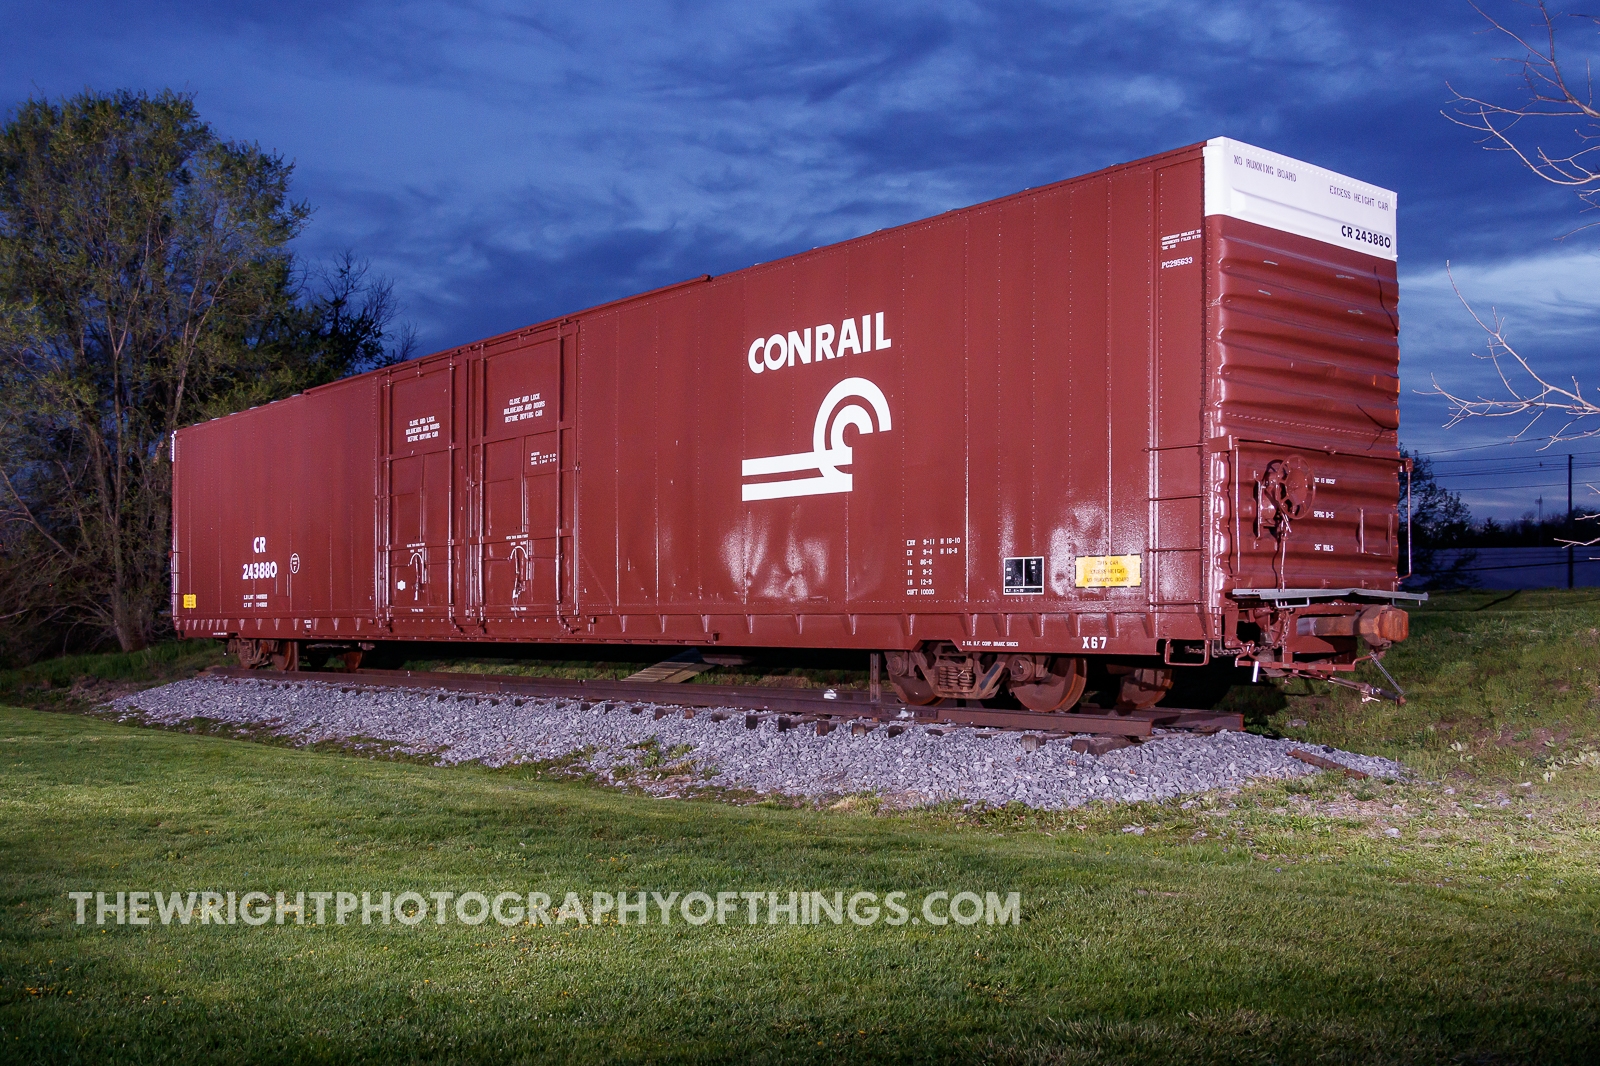 Conrail 243880 is a class X67 Boxcar and  is pictured in Martinsburg , Pennsylvania, United States.  This was taken along the Conrail. Photo Copyright: Jon Wright uploaded to Railroad Gallery on 11/20/2022. This photograph of Conrail 243880 was taken on Sunday, November 20, 2022. All Rights Reserved. 